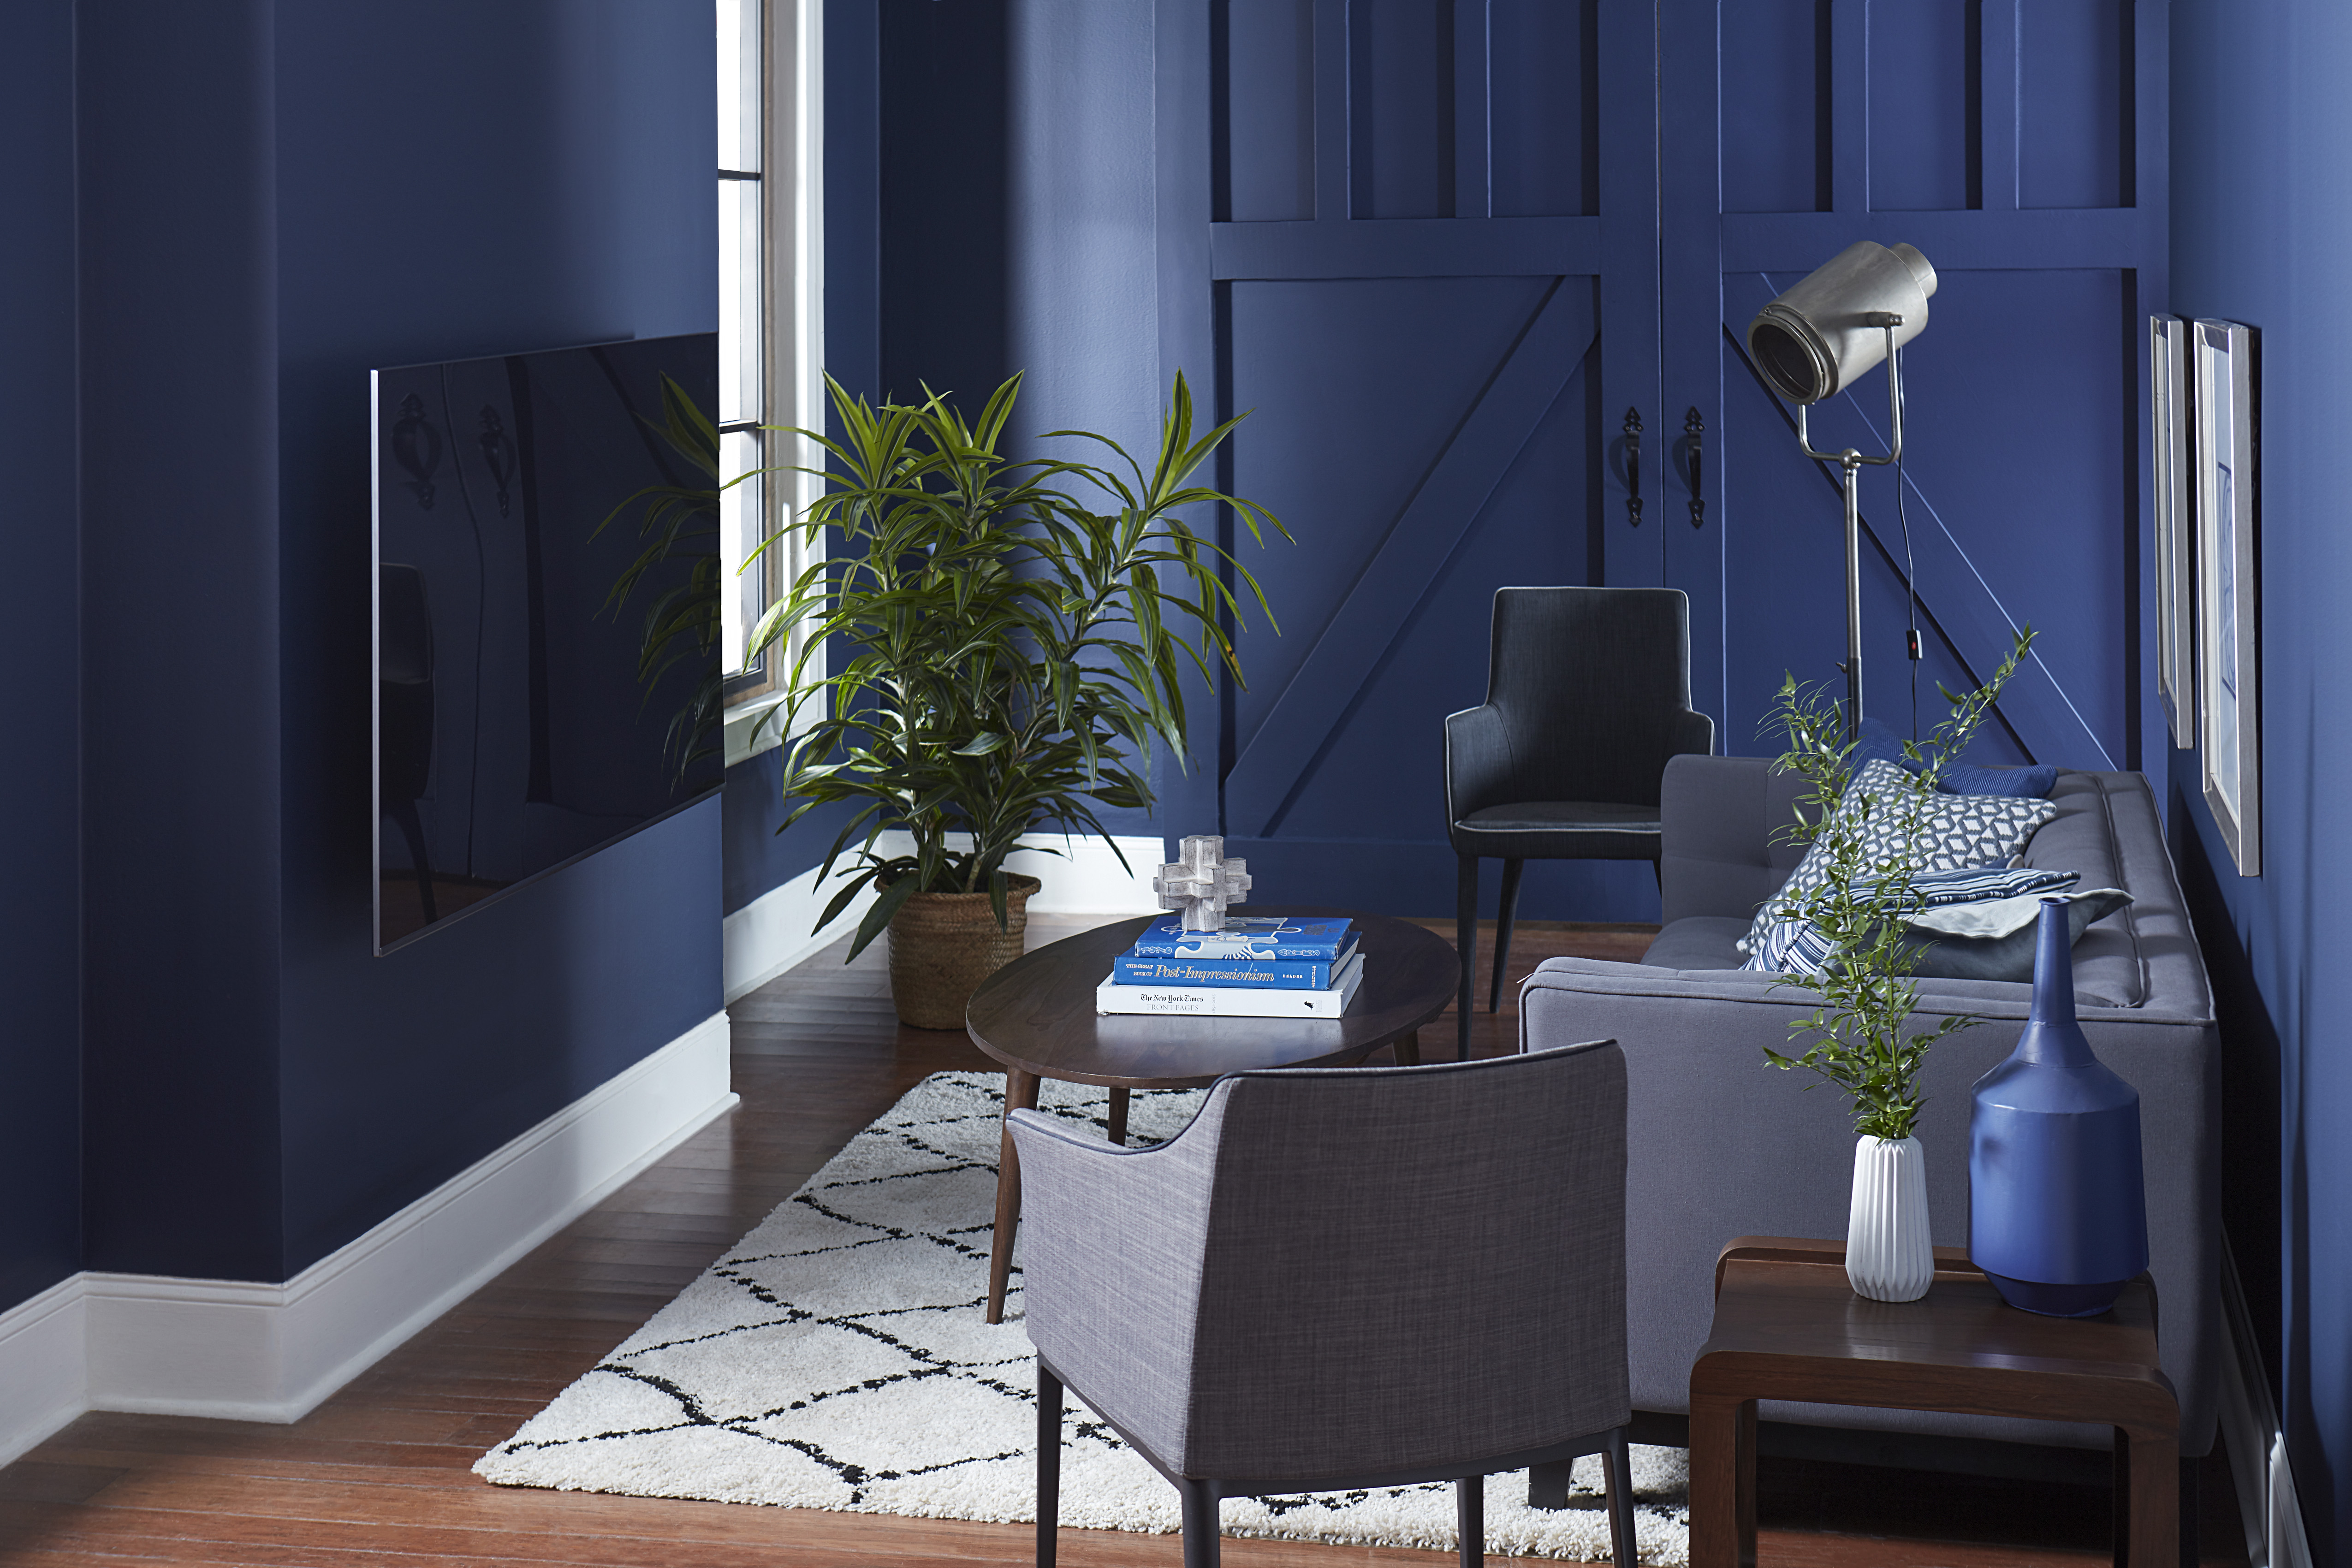 Proof That Dark Wall Colors Can Work in Small Spaces